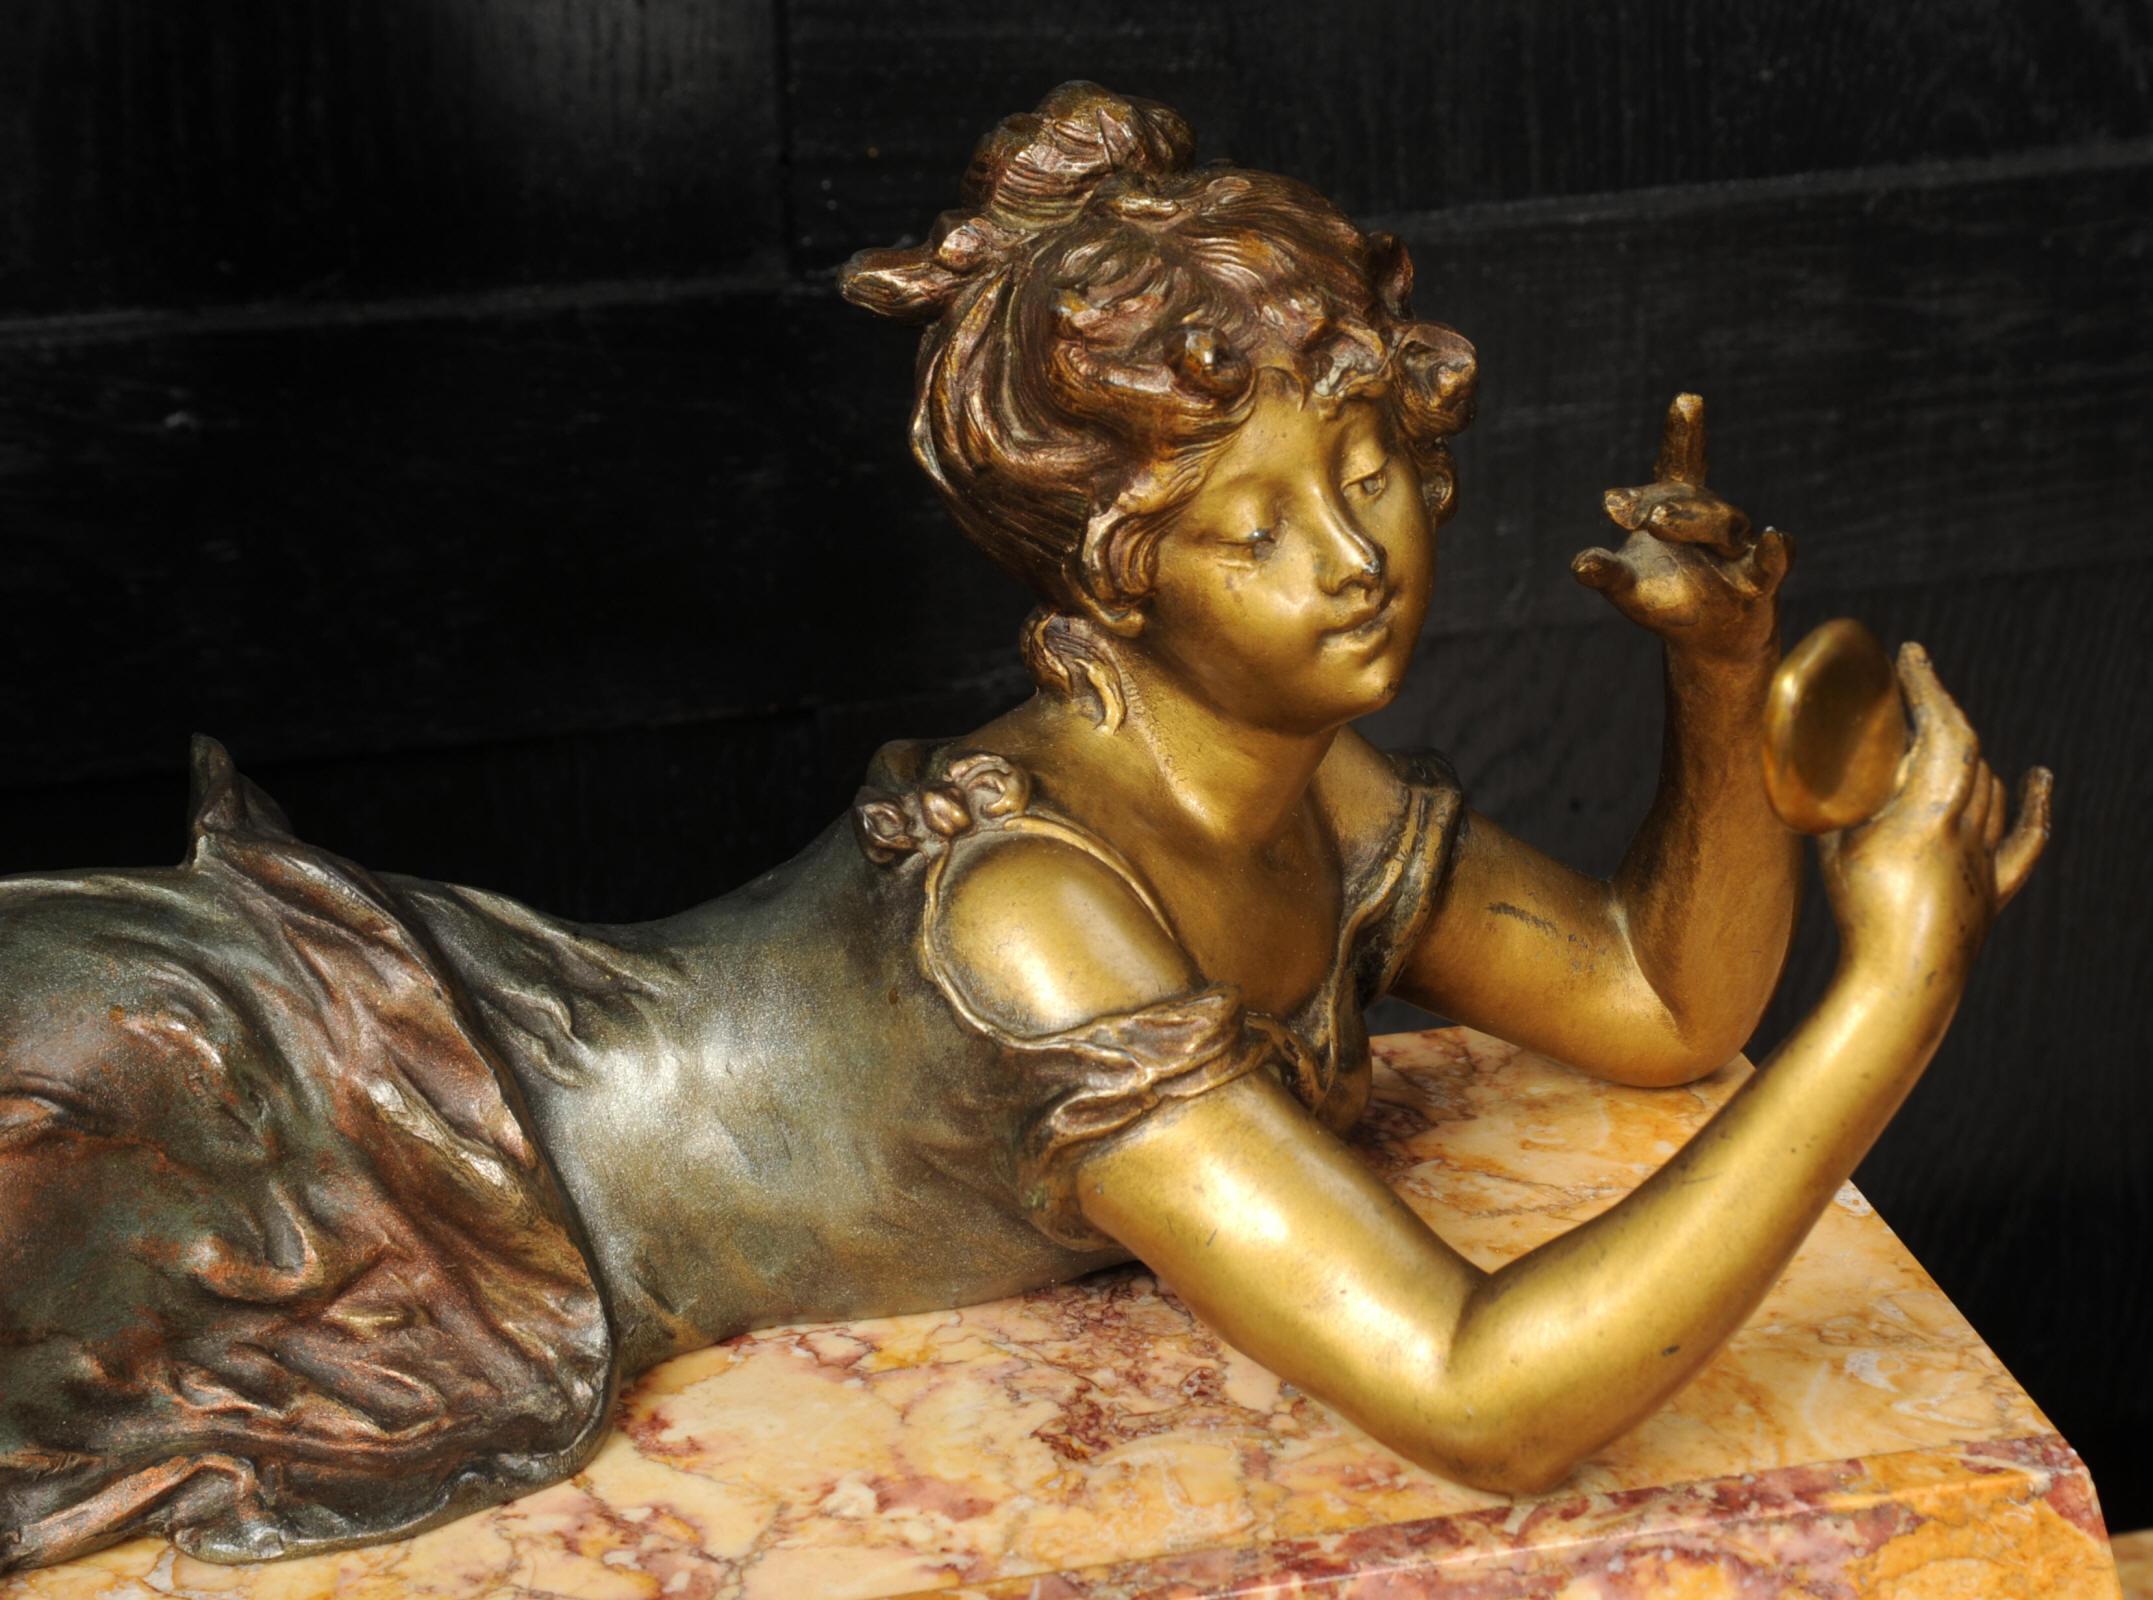 ~ French - circa 1925 ~

~~ Excellent condition, fully overhauled ~~

A stunning original Art Deco French clock featuring a sensuous figure of a young woman contemplating her own reflection. She is beautifully sculptured in patinated metal,